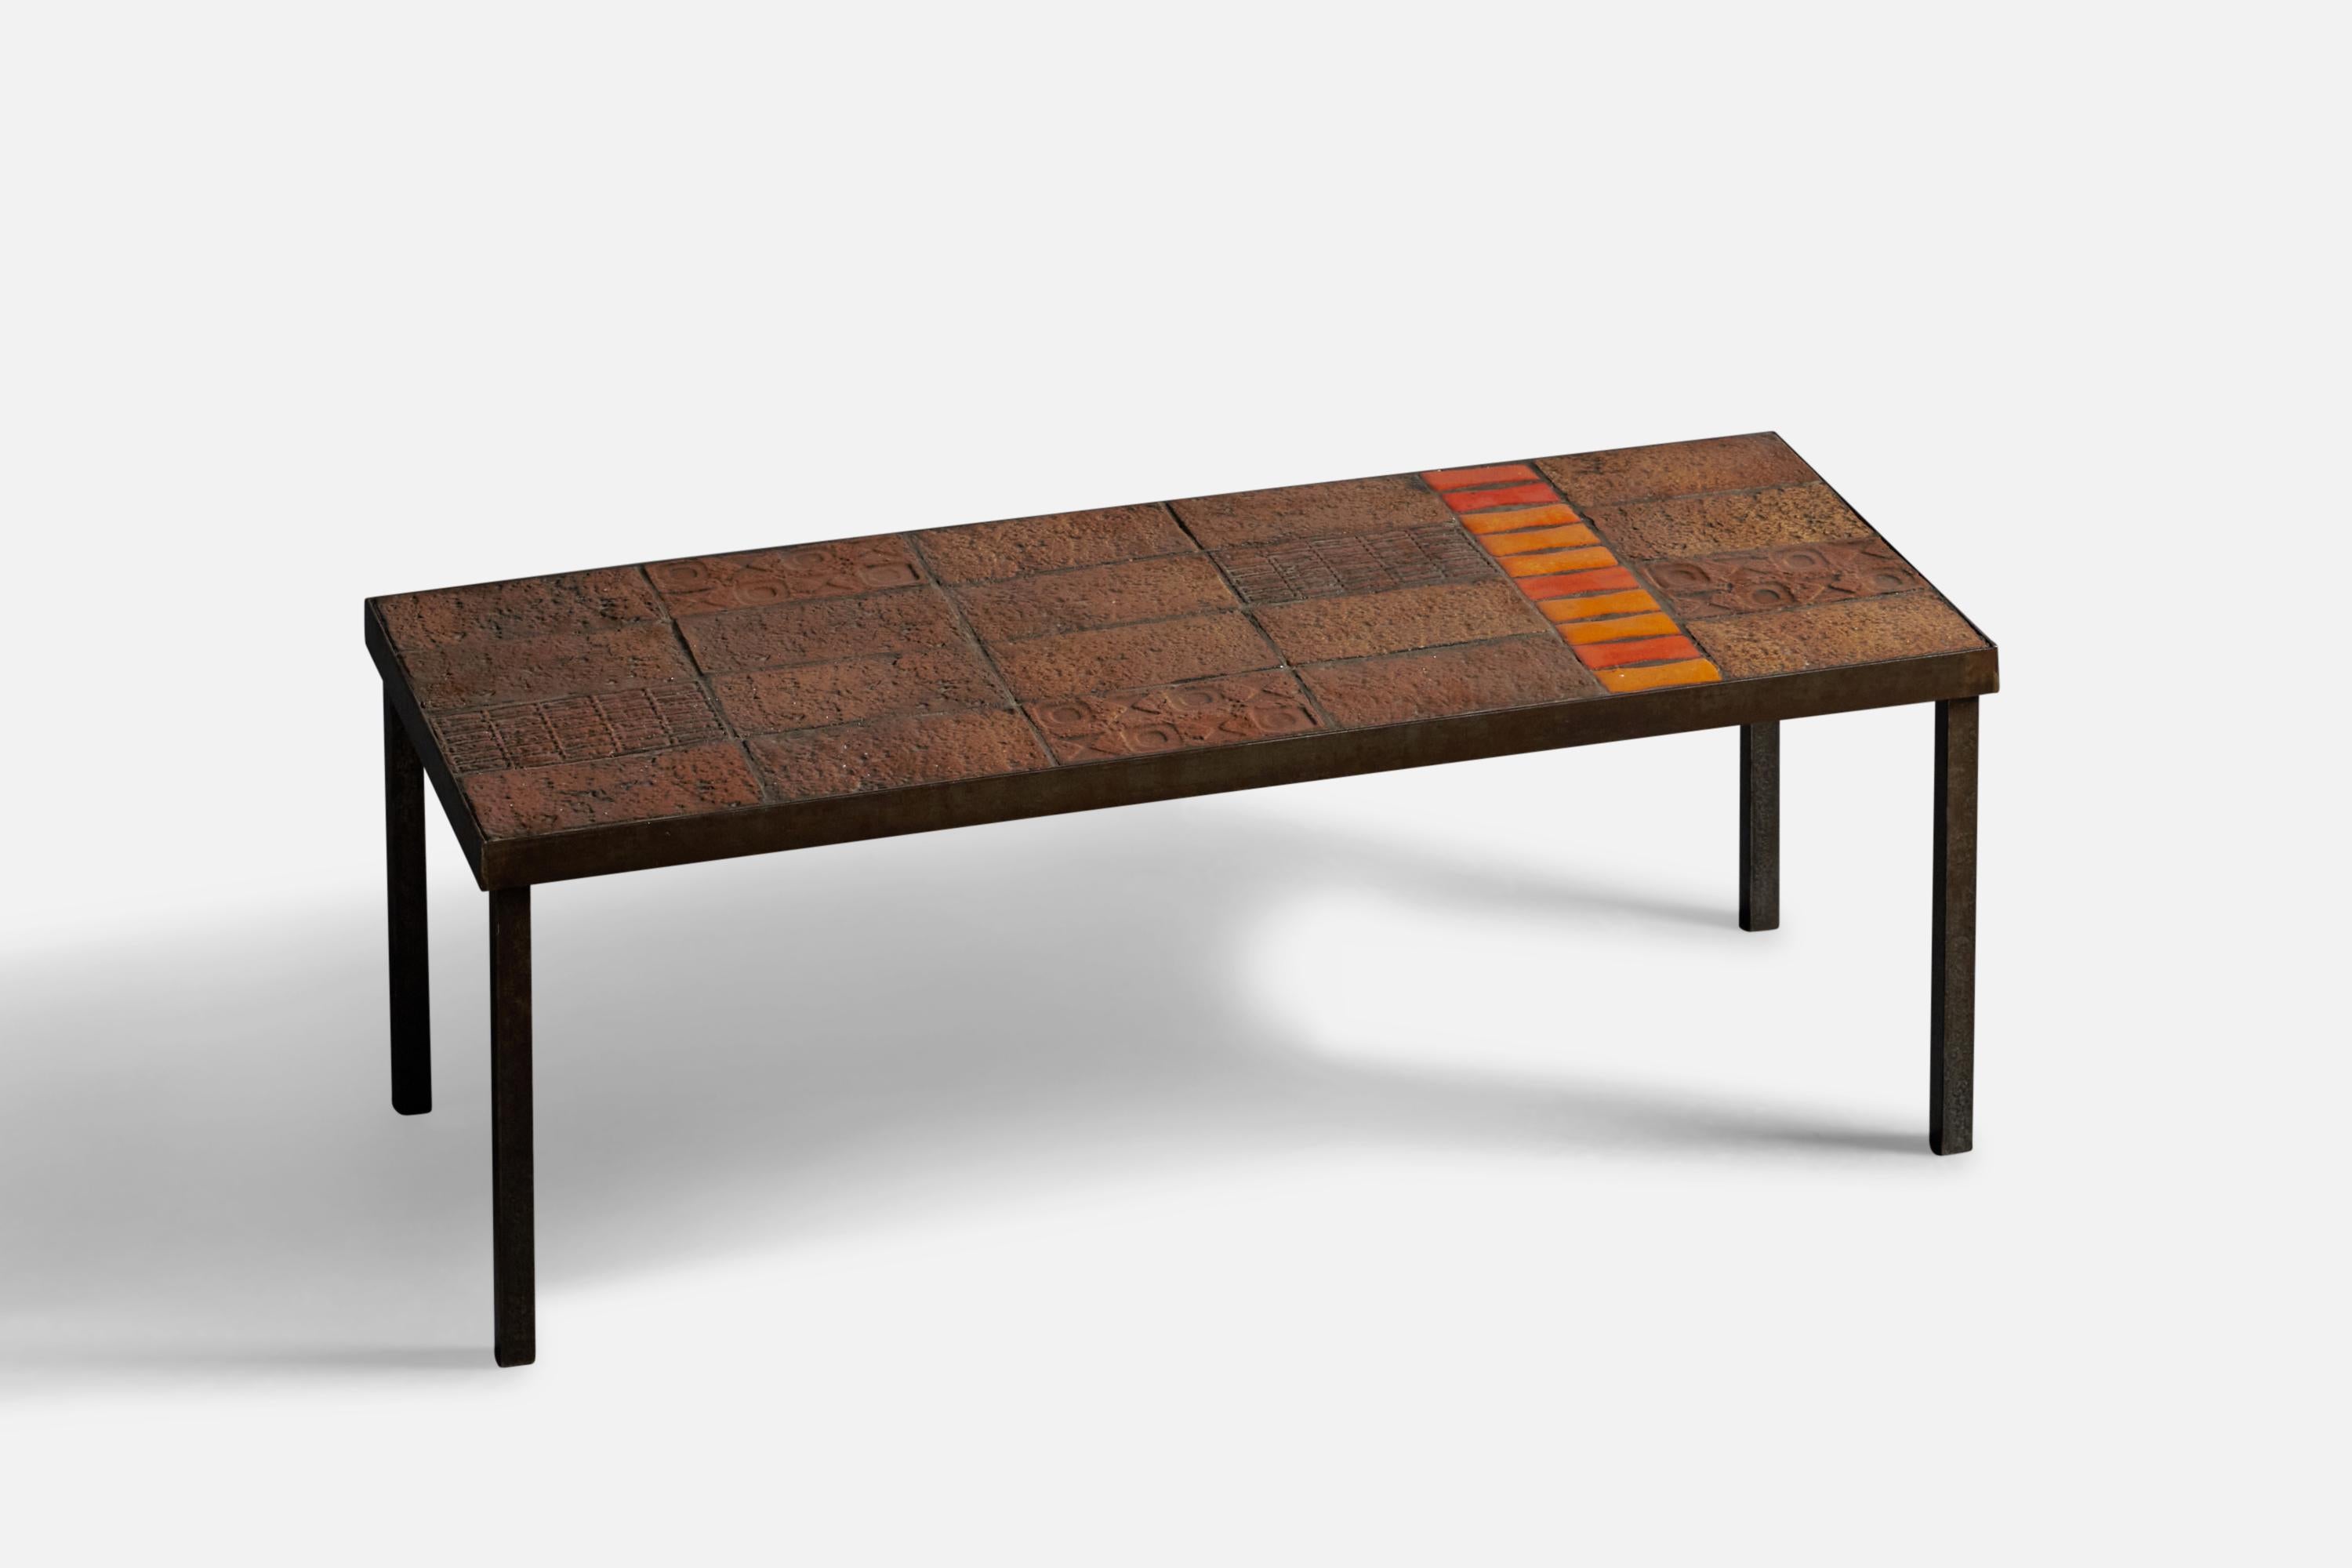 A brown and orange-glazed ceramic and iron coffee or cocktail table, designed and produced by Vallauris, France, c. 1960s.